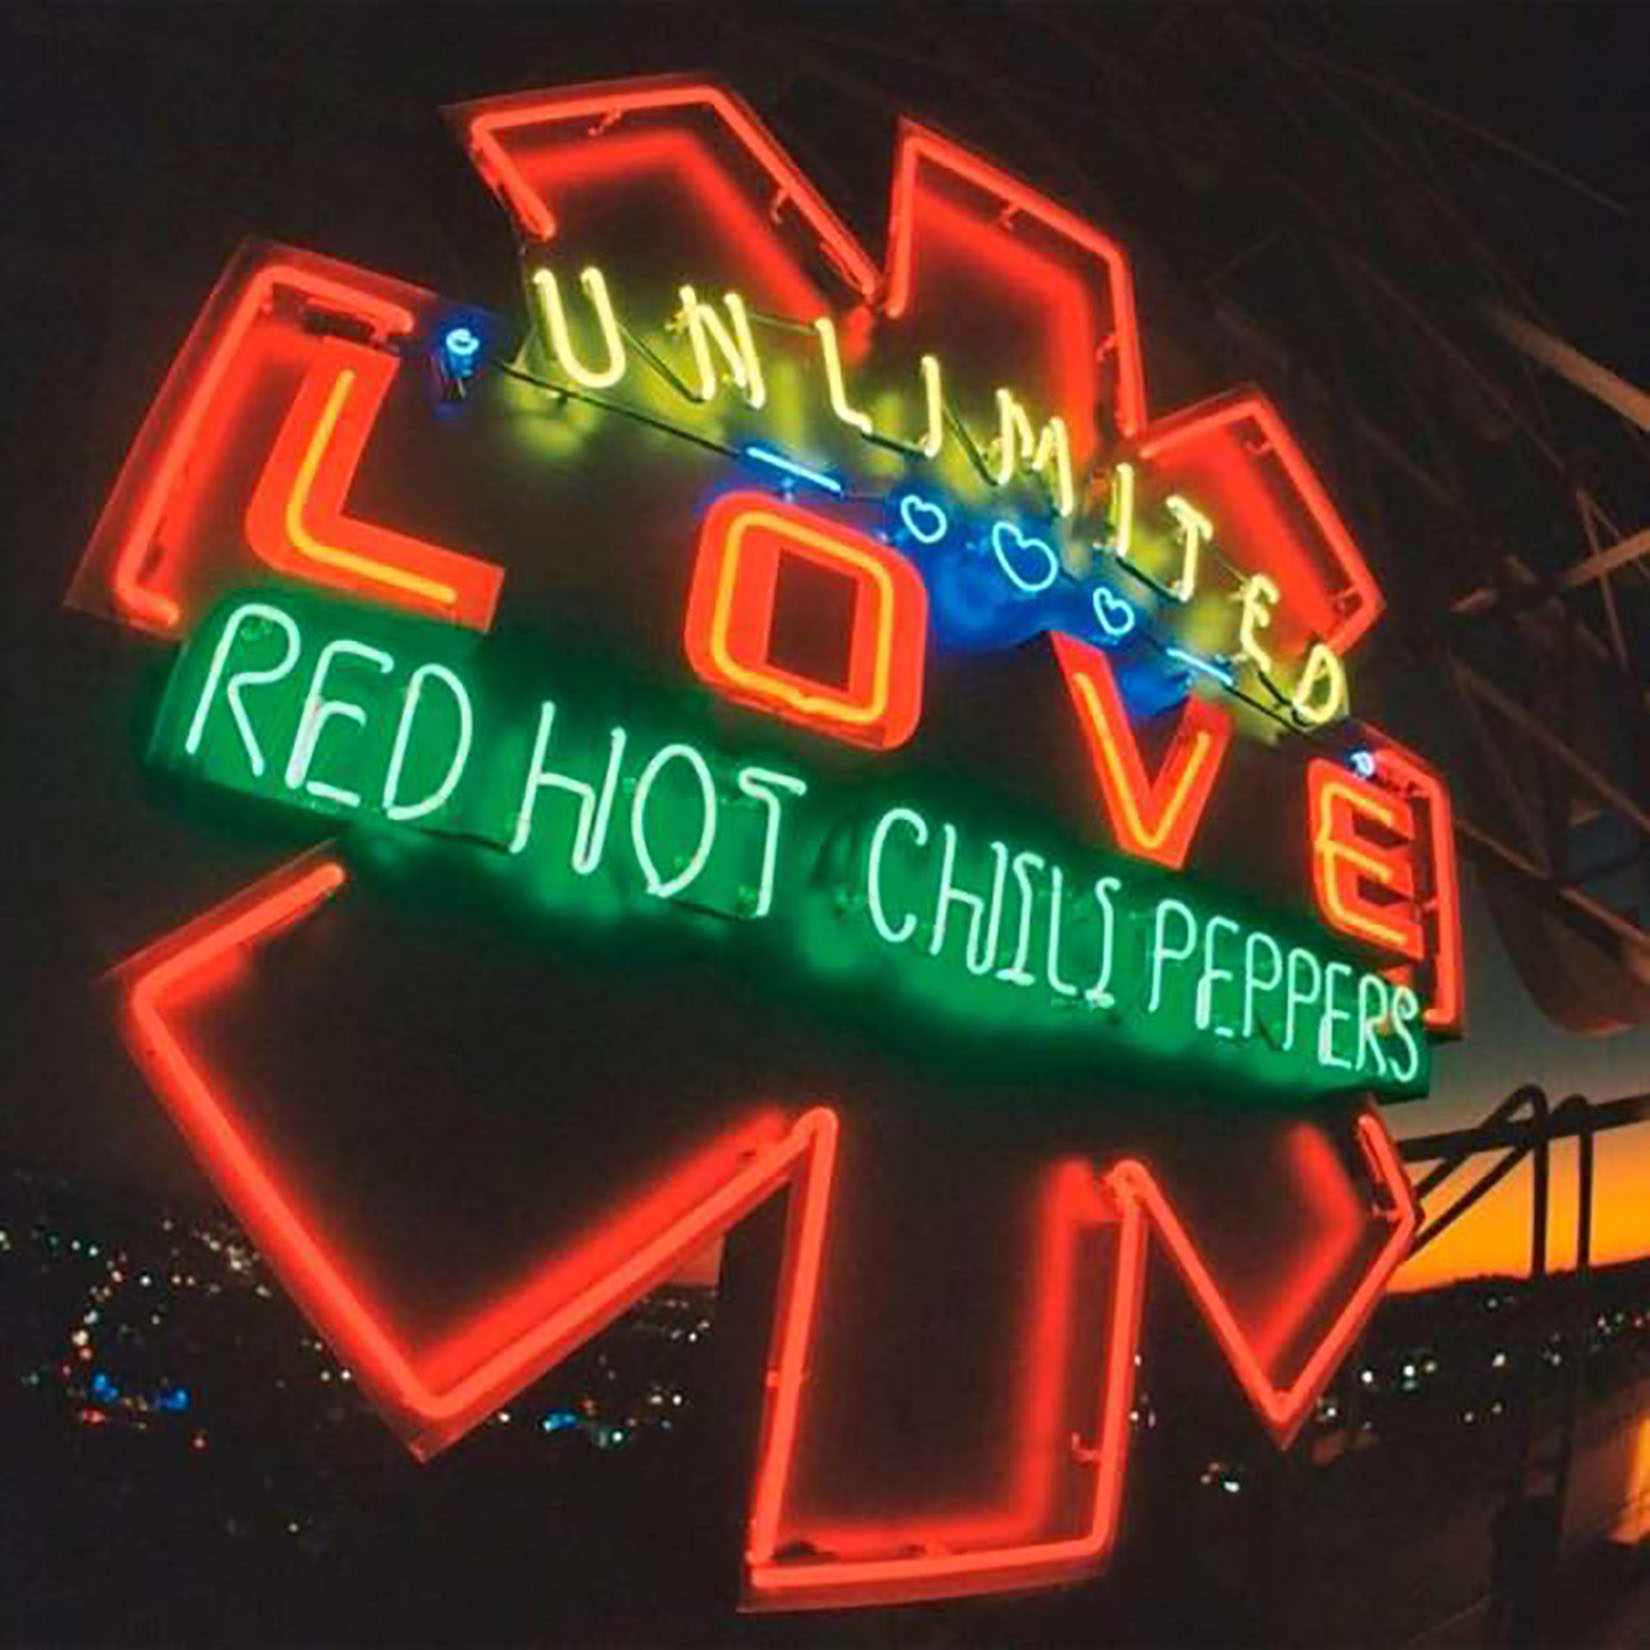 Red hot chili peppers, Unlimited love, album